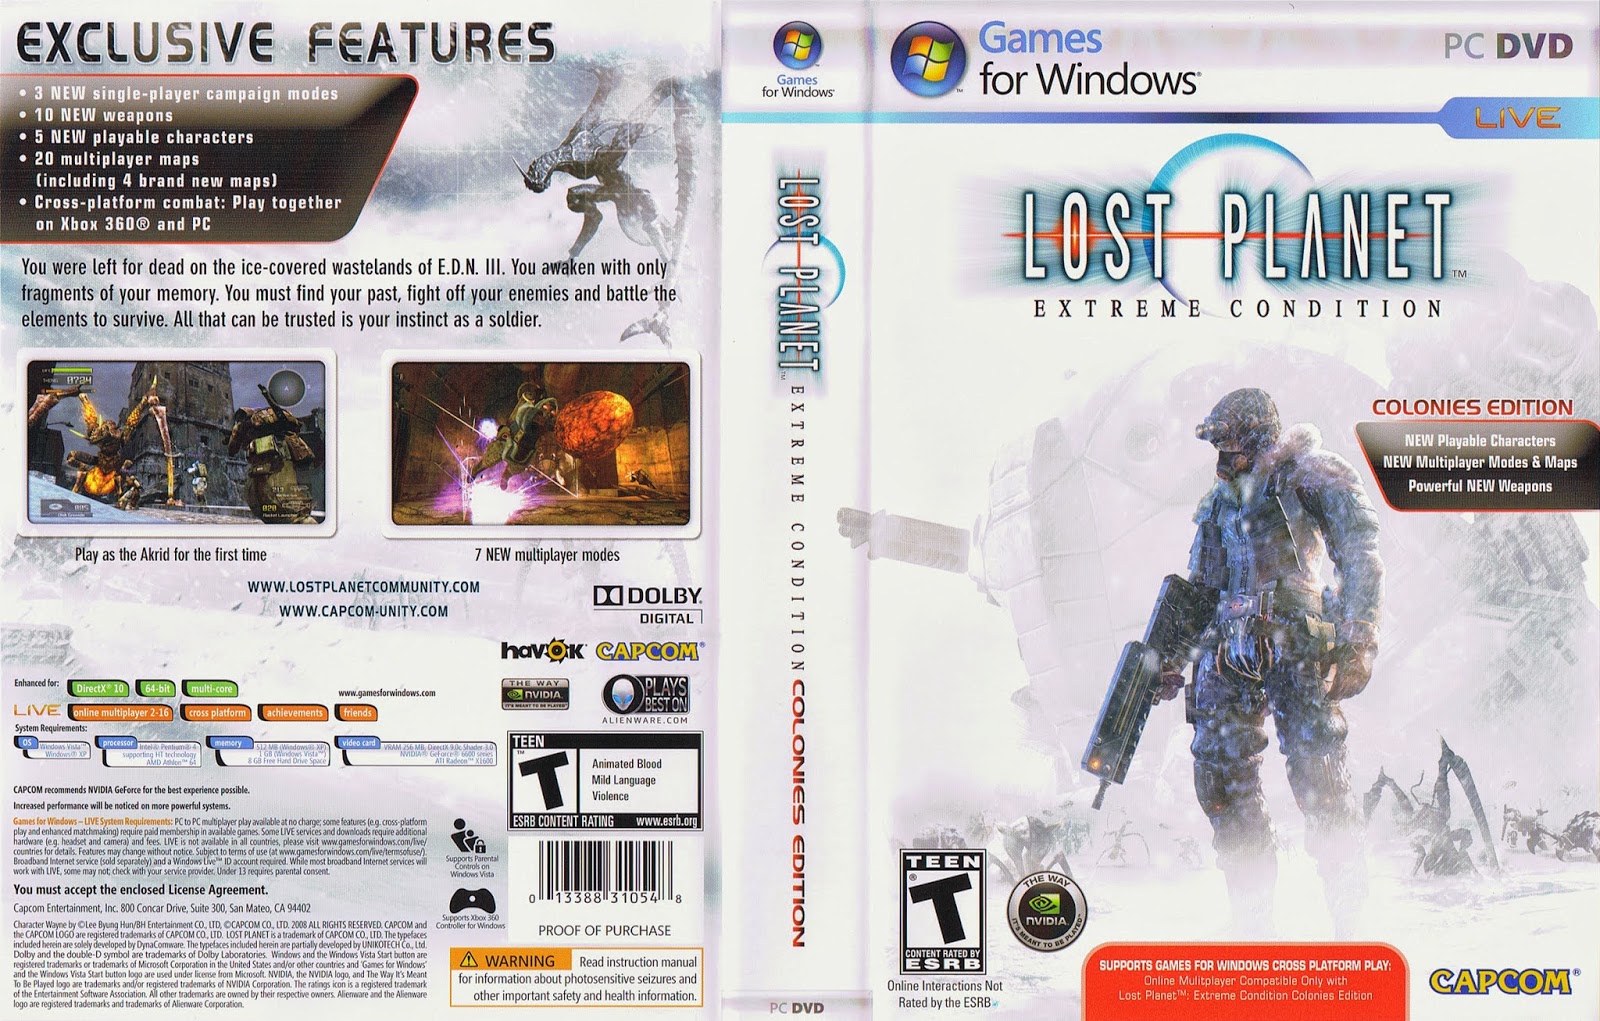 Lost игра коды. Lost Planet диск. Lost Planet extreme condition Colonies Edition. Lost Planet обложка PC. Lost Planet 2 коллекционное издание.